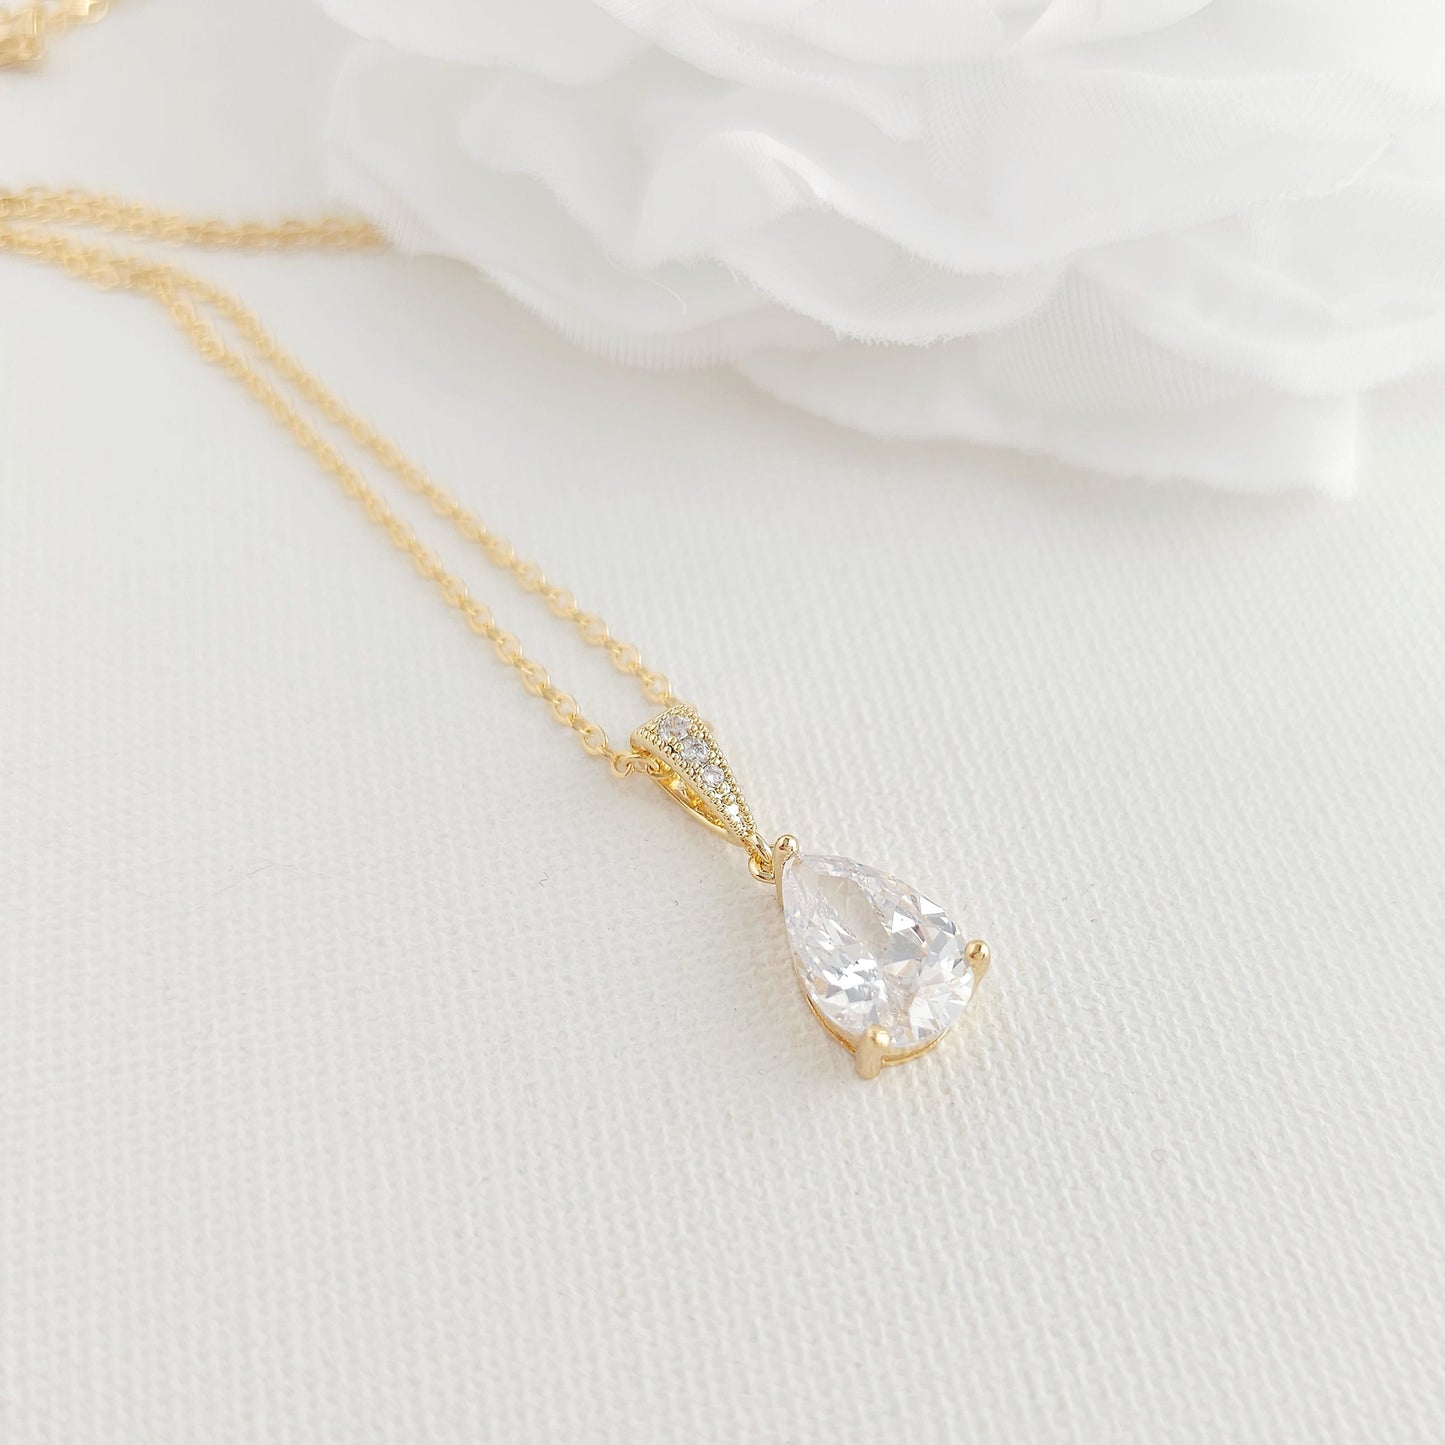 Teardrop Necklace in Rose Gold for Weddings & Occasions-Nicole